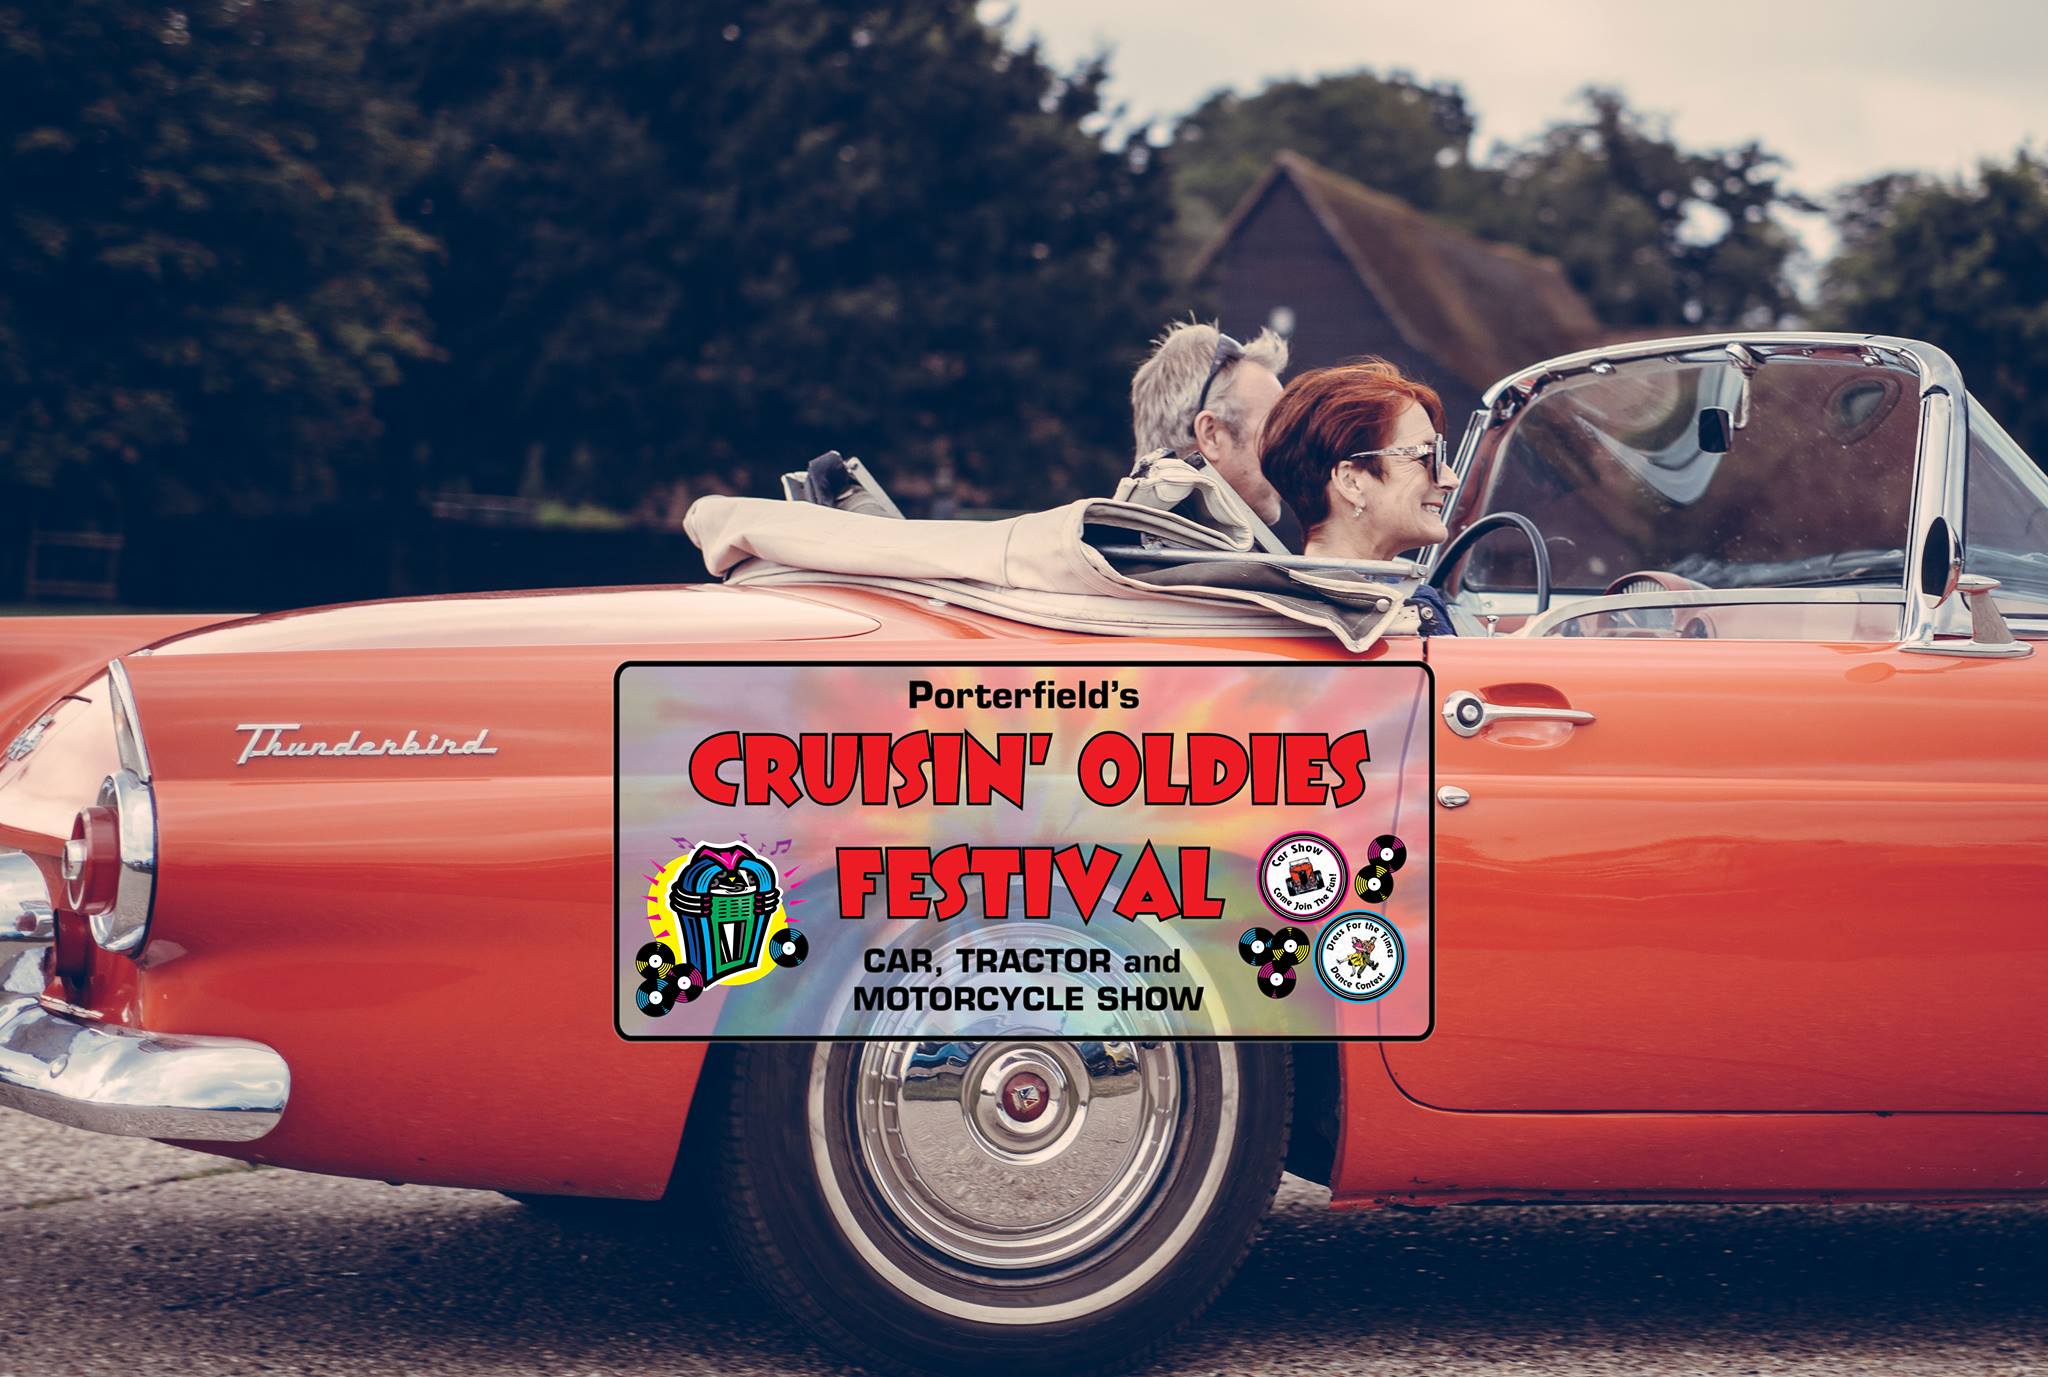 Porterfield Cruisin' Oldies 3-Day Weekend Ticket to the 21st Annual